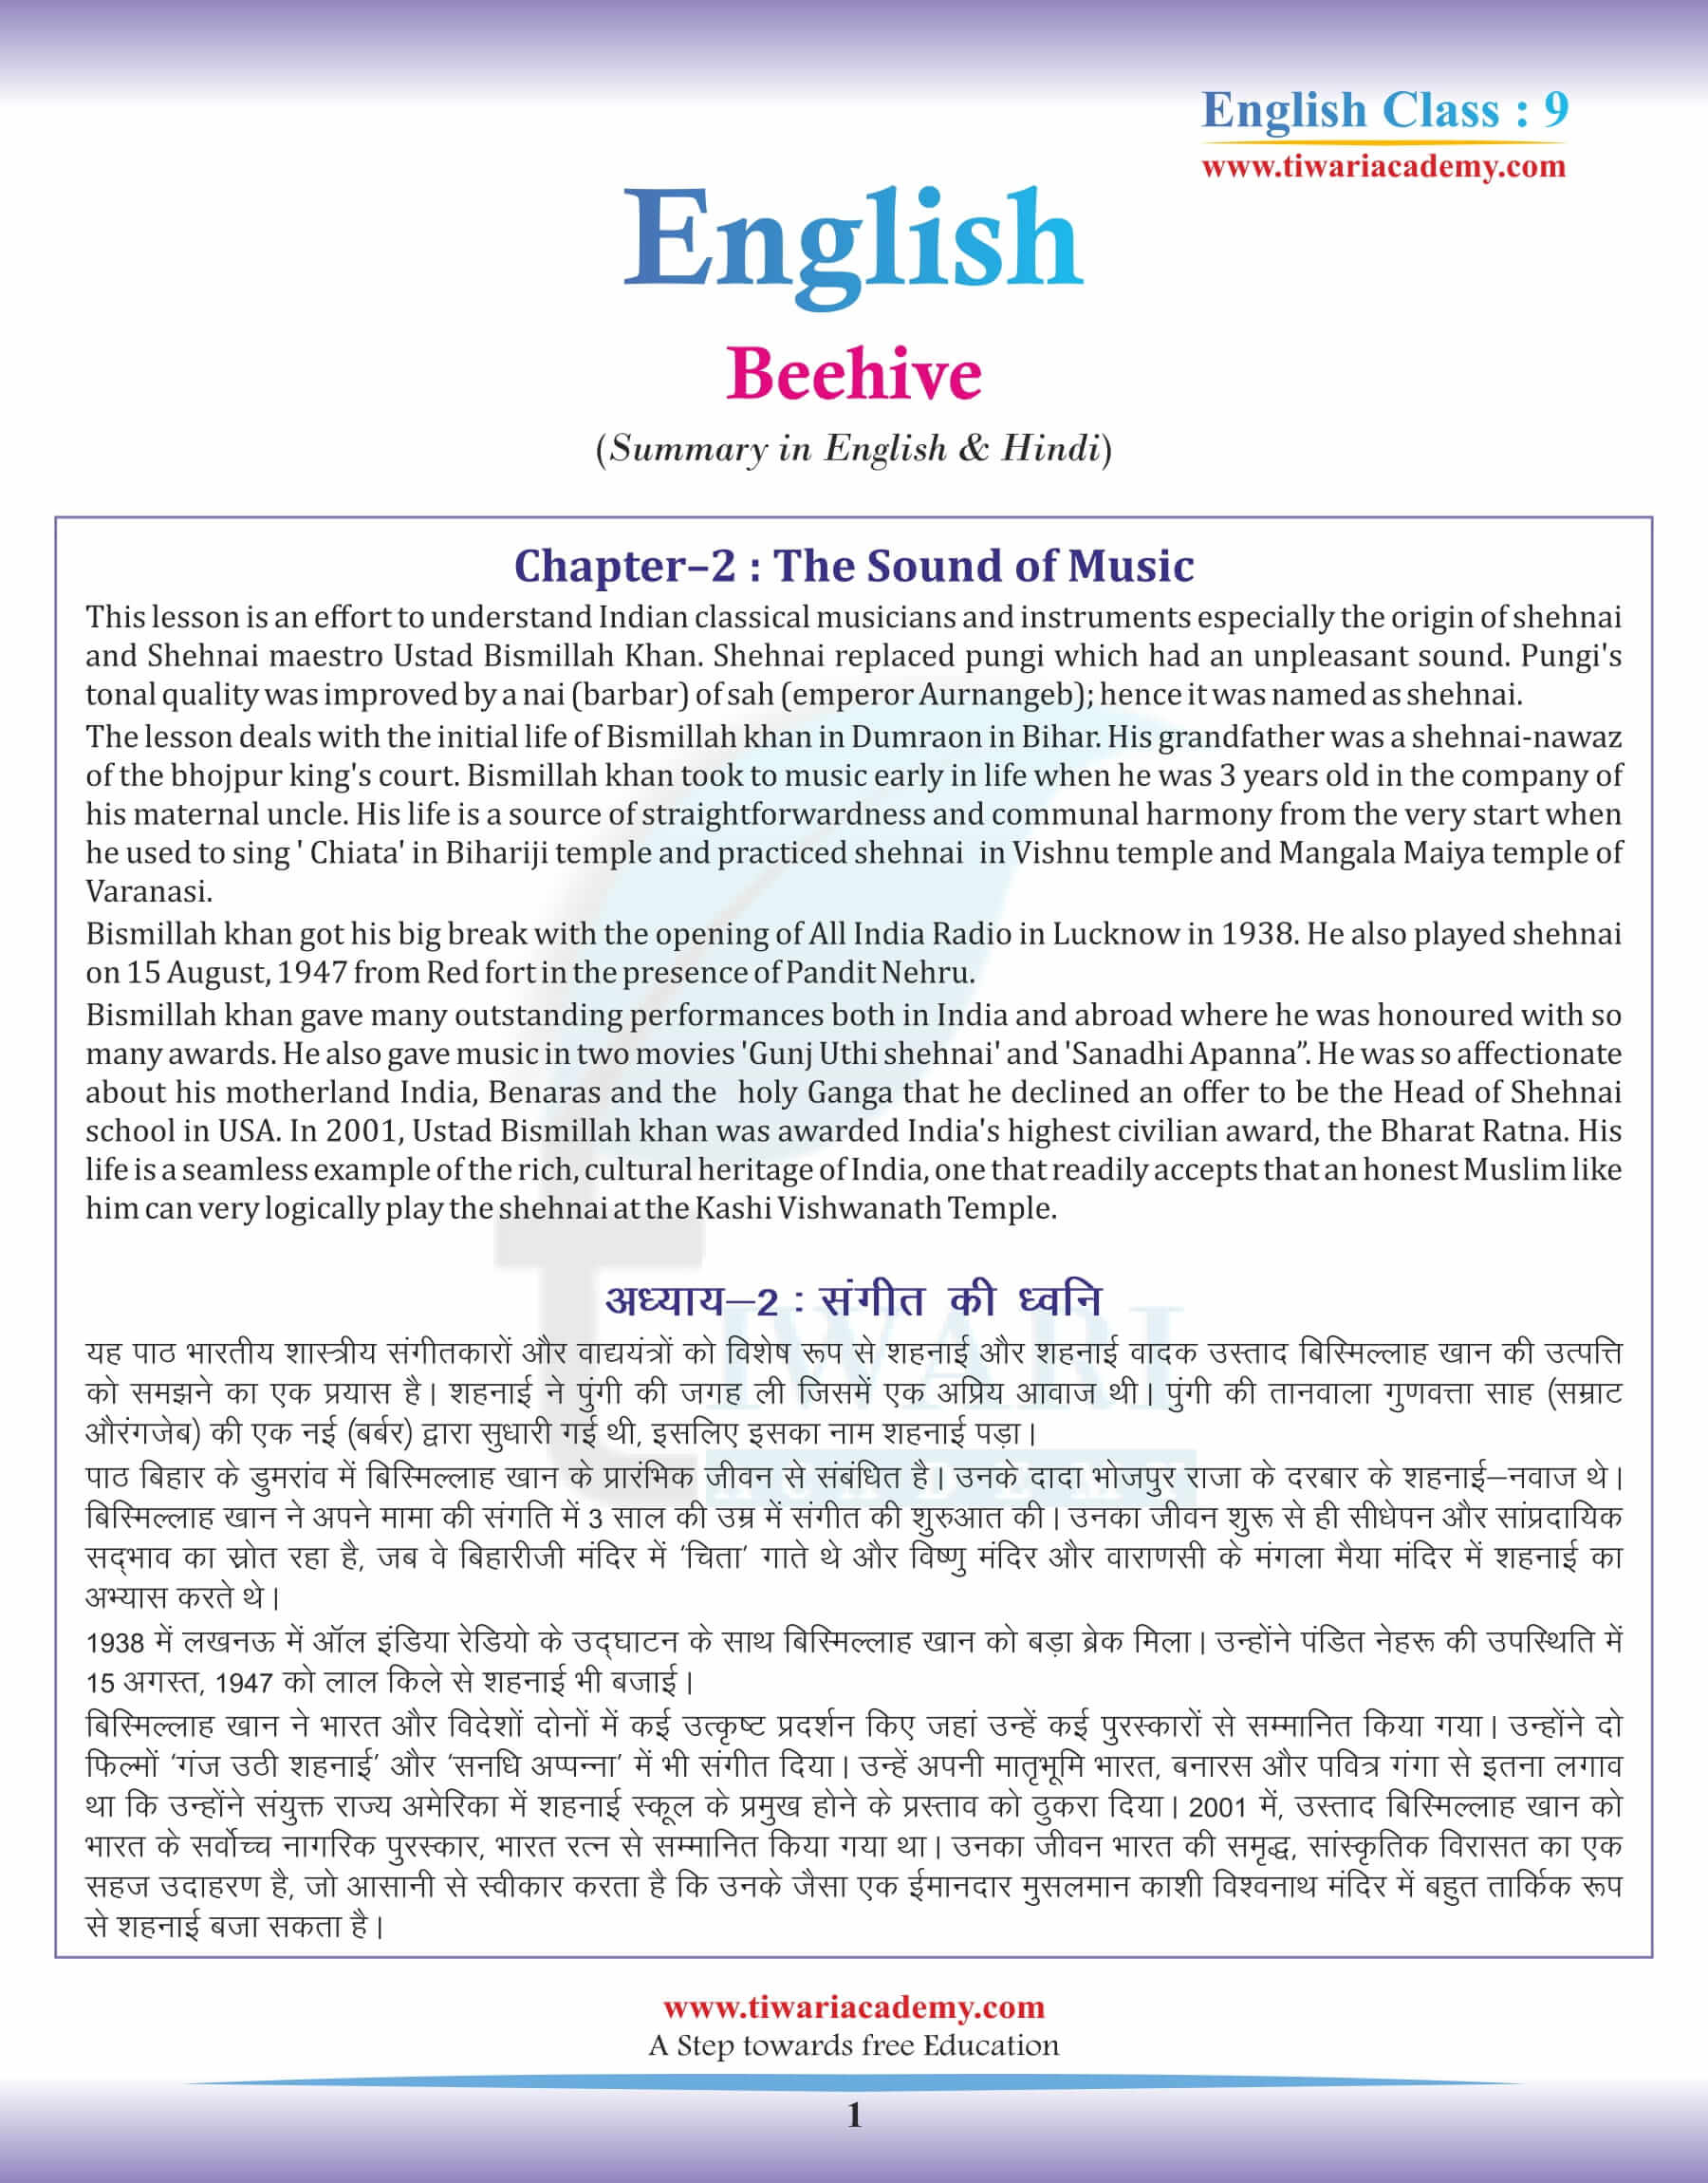 9th English Beehive Chapter 2 Summary in Hindi and English